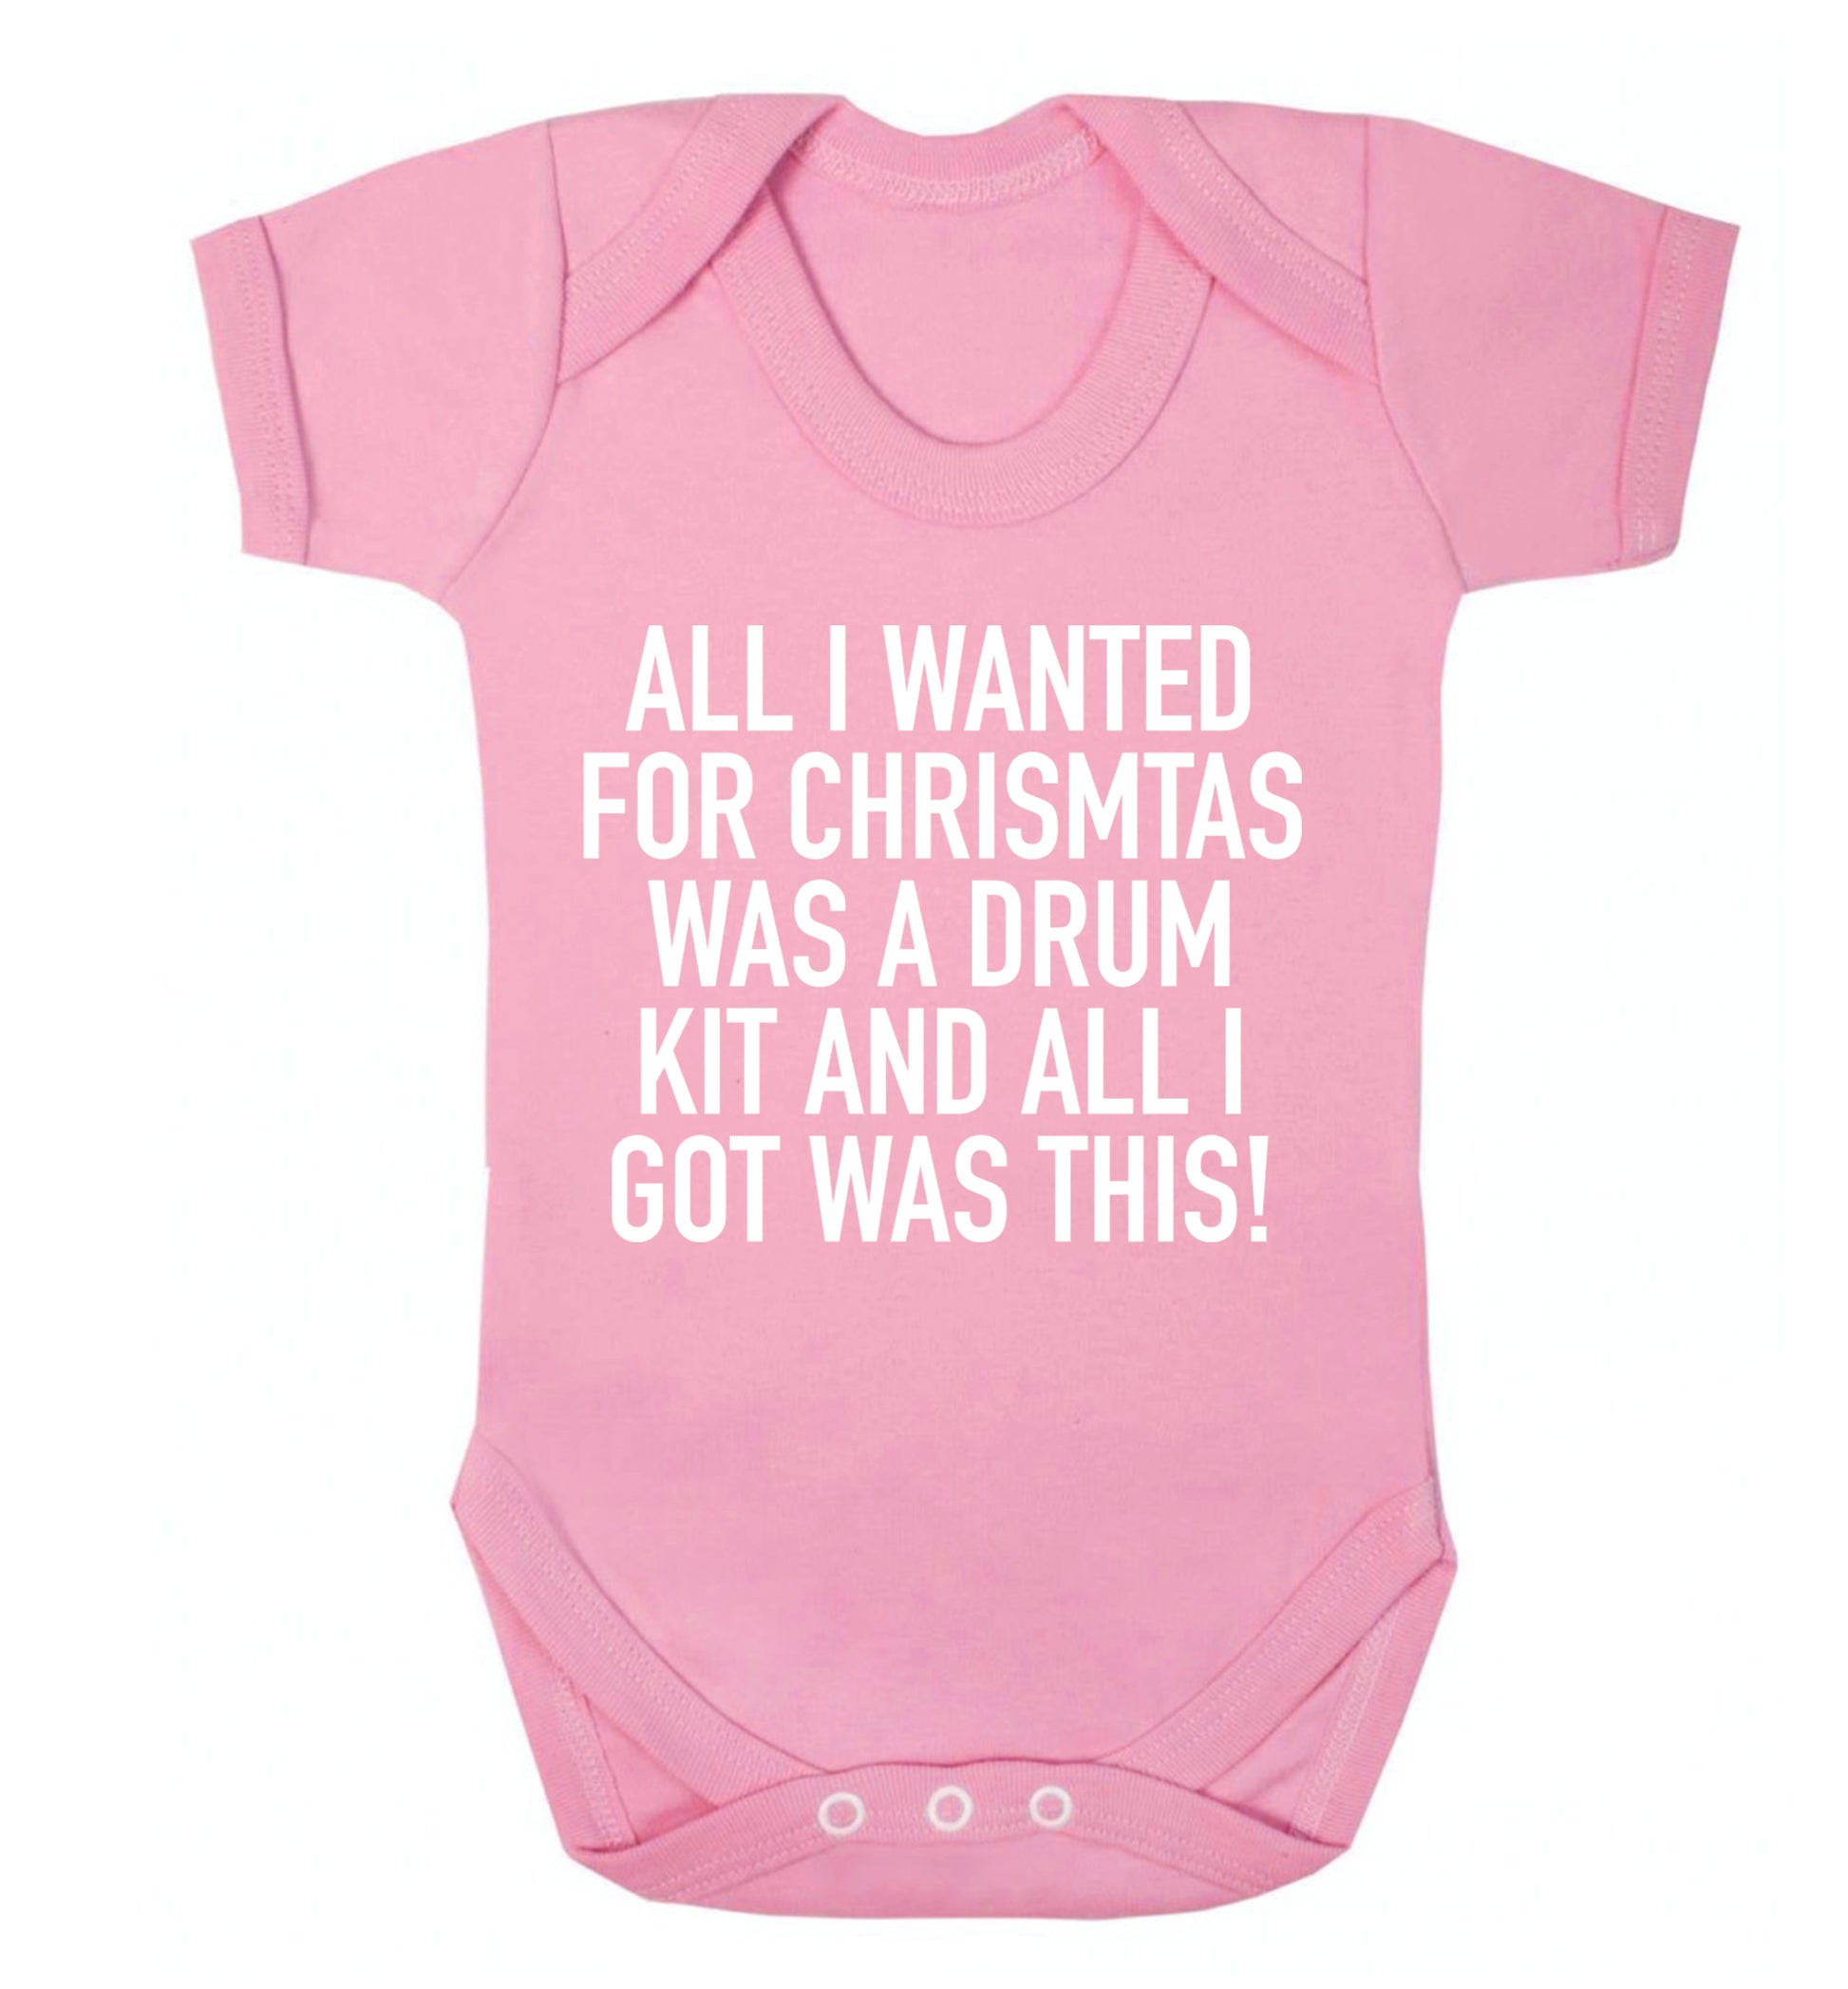 All I wanted for Christmas was a drum kit and all I got was this! Baby Vest pale pink 18-24 months